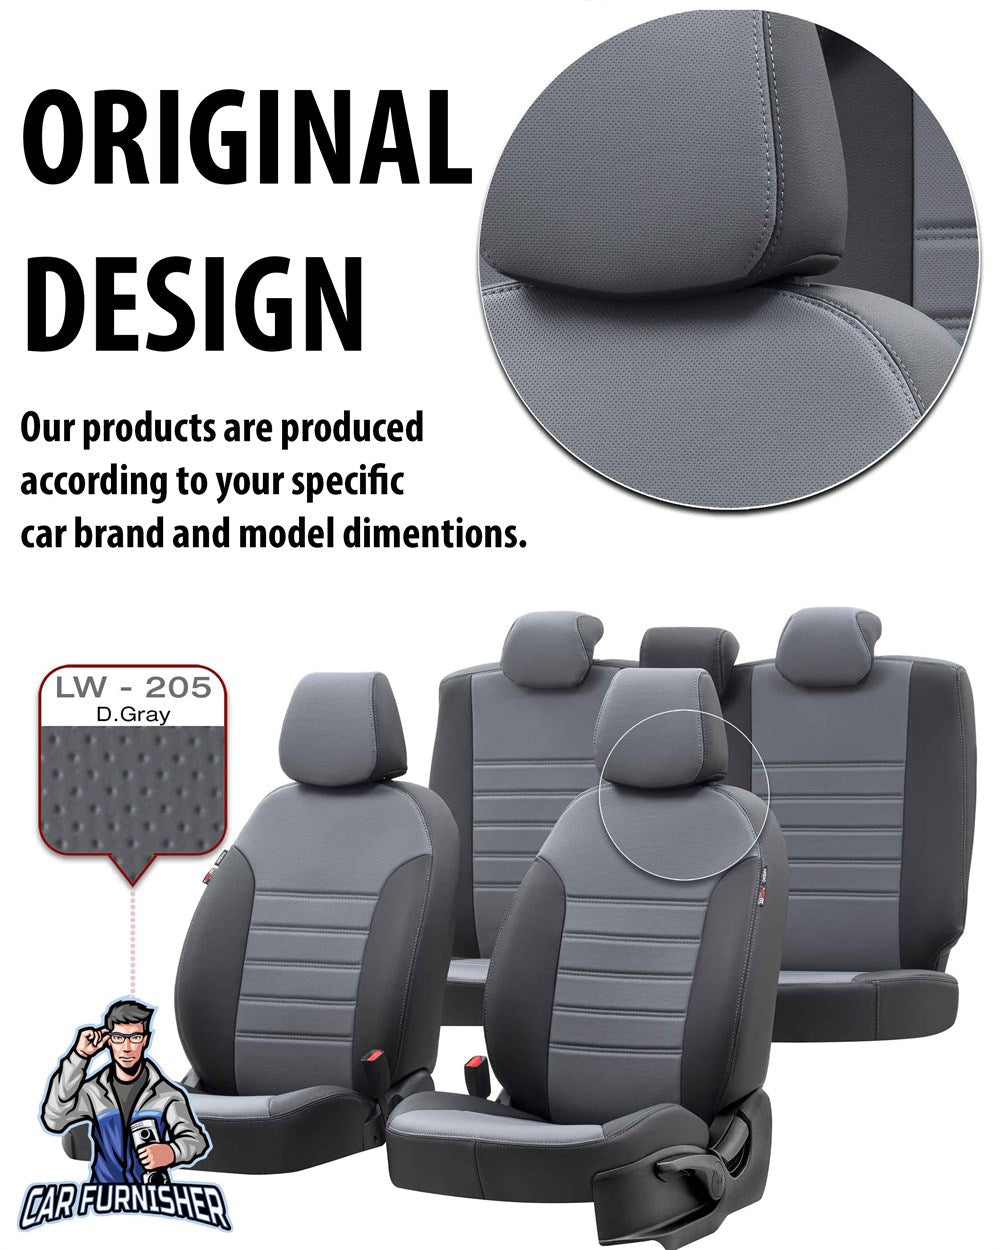 Dacia Lodgy Seat Covers Istanbul Leather Design Burgundy Leather